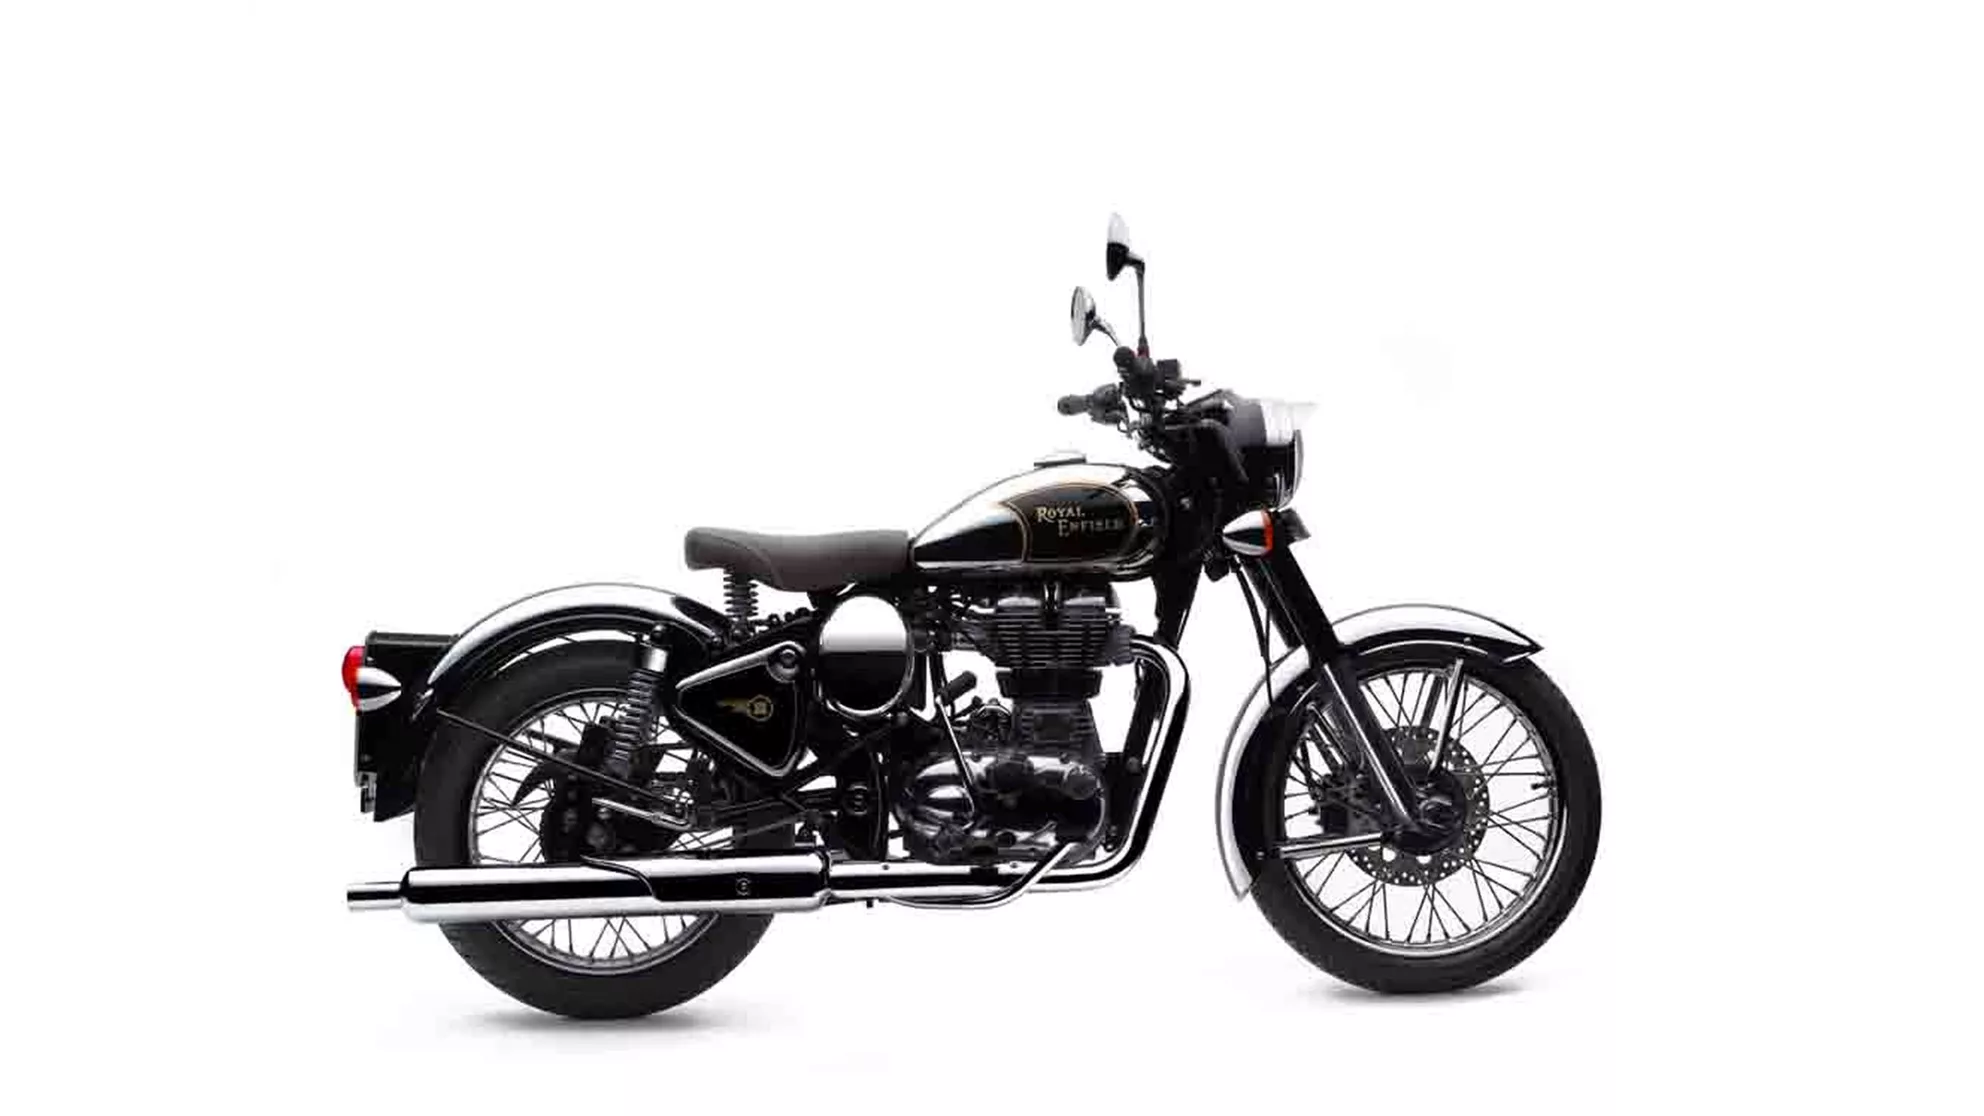 Royal Enfield Bullet 500 Classic Chrome - Image 1